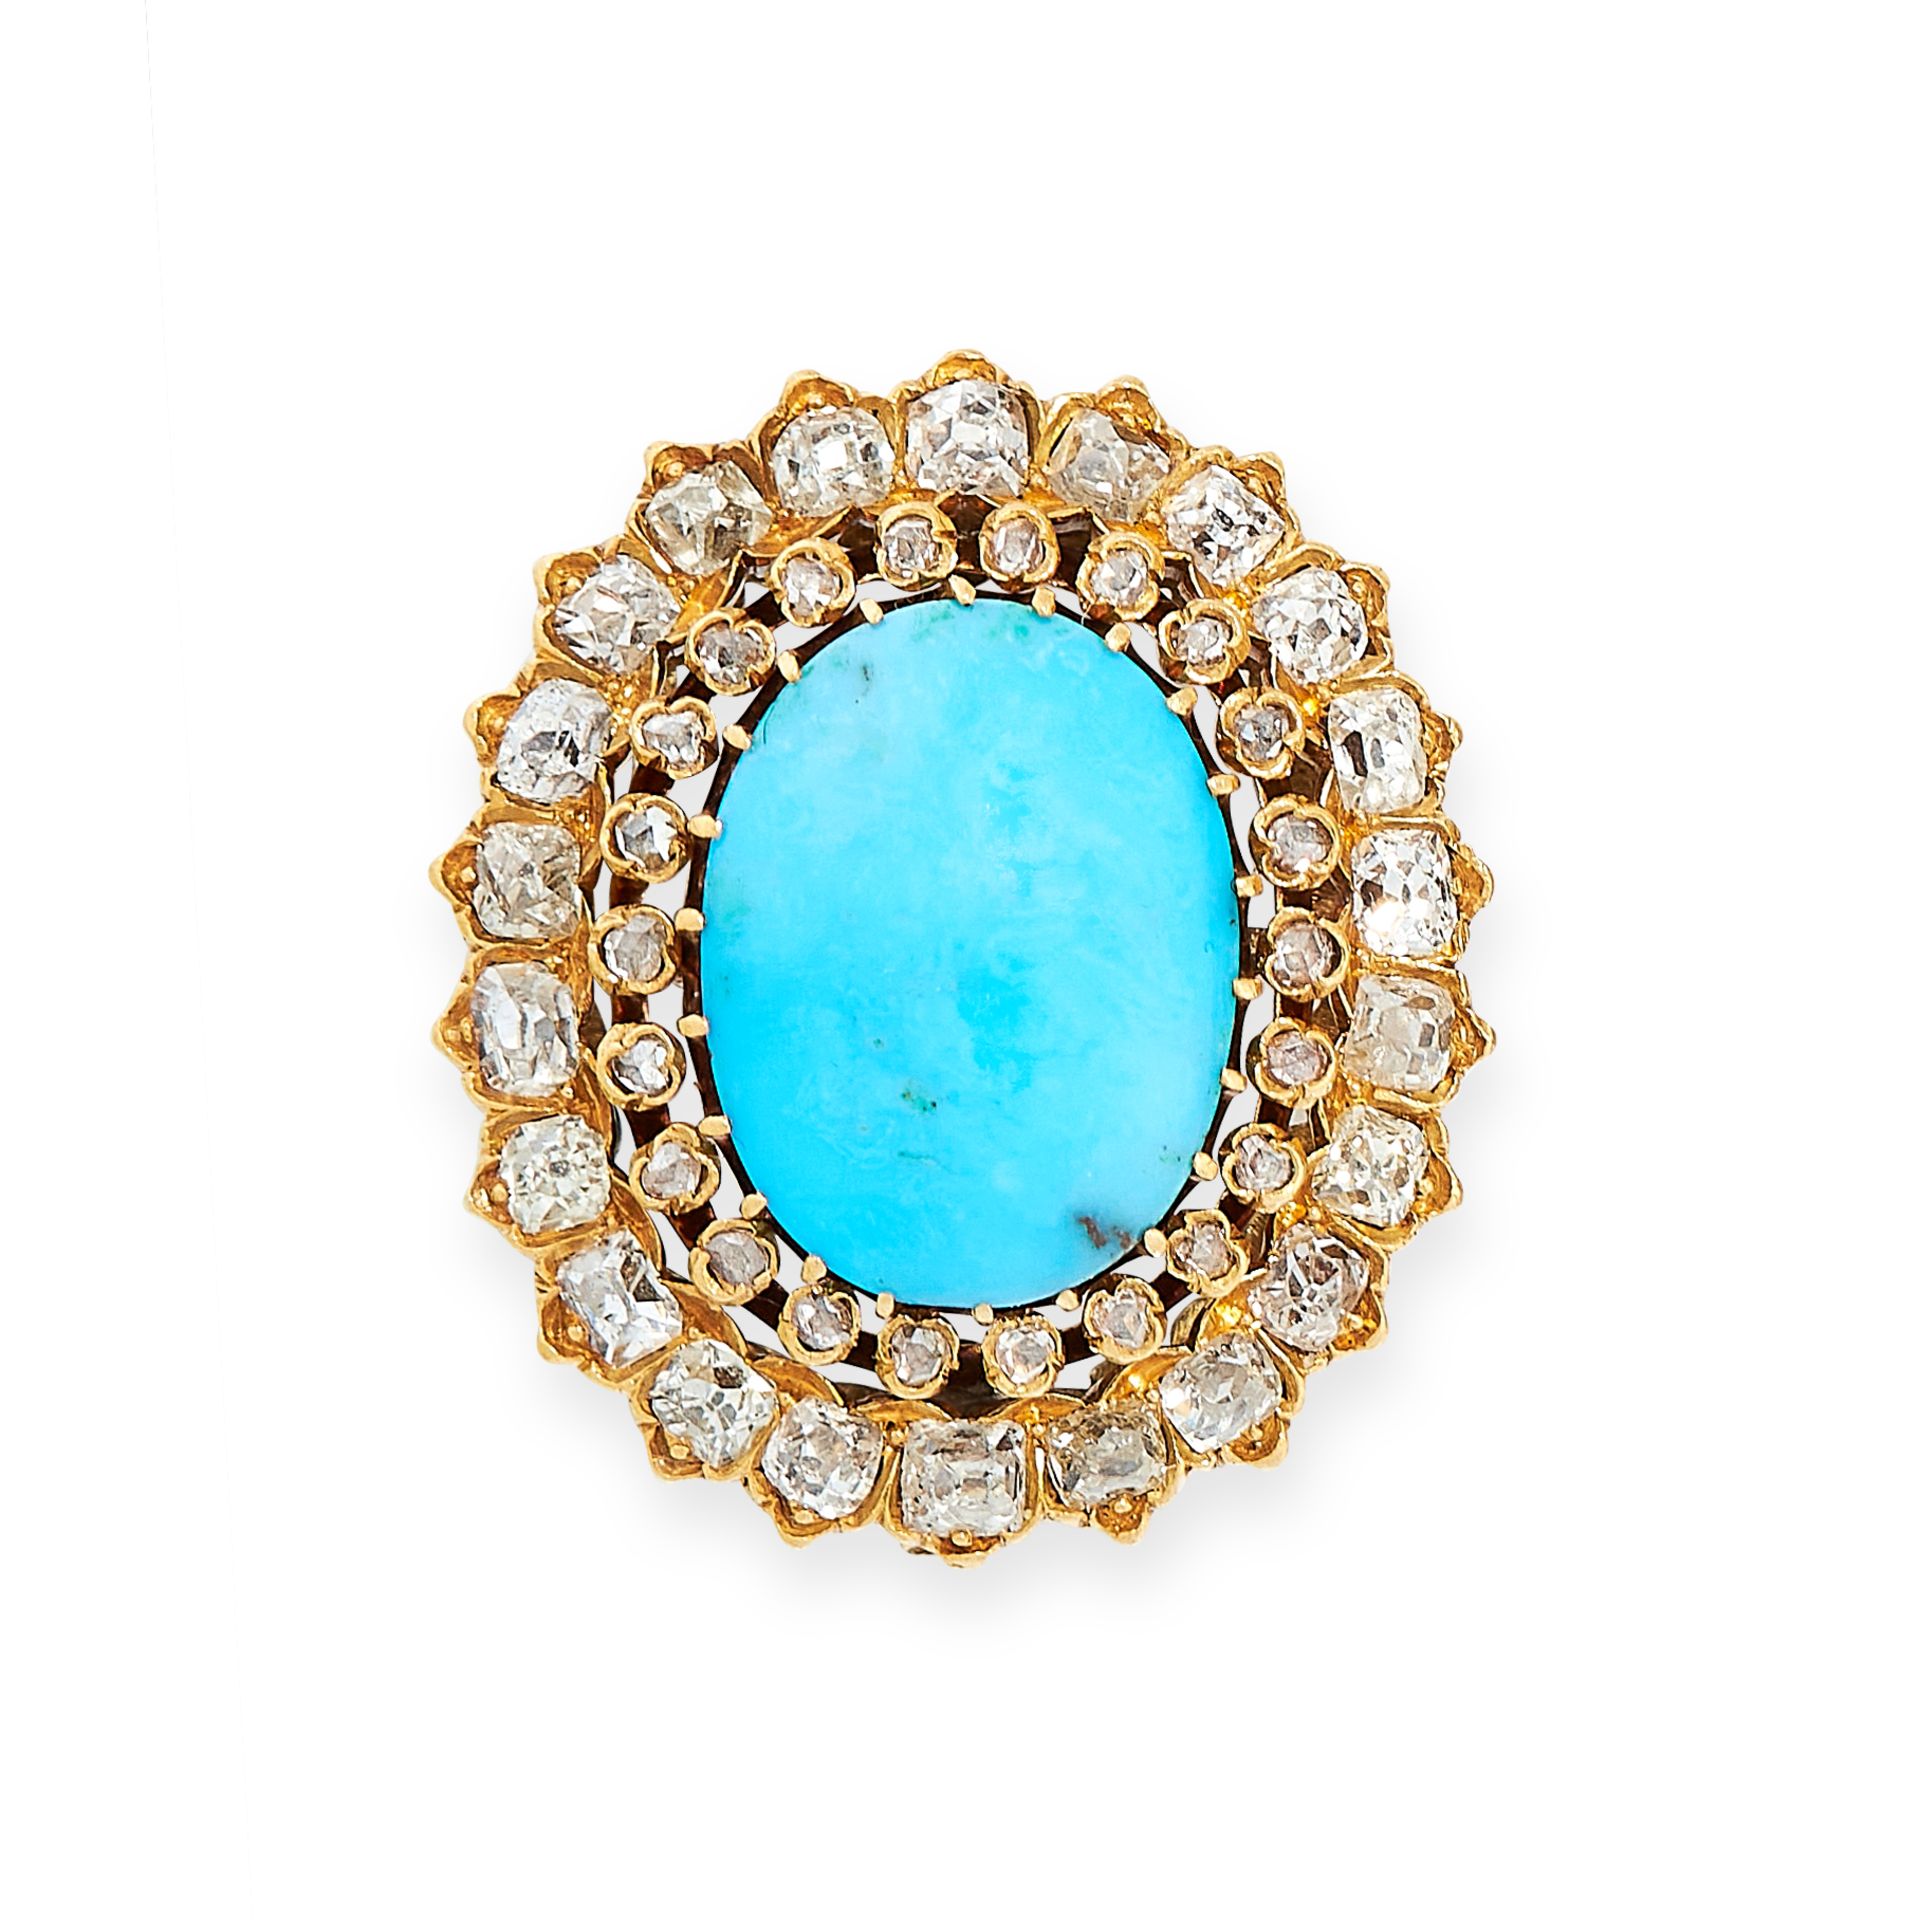 ANTIQUE TURQUOISE AND DIAMOND BROOCH, 19TH CENTURY in yellow gold, set with a cabochon turquoise